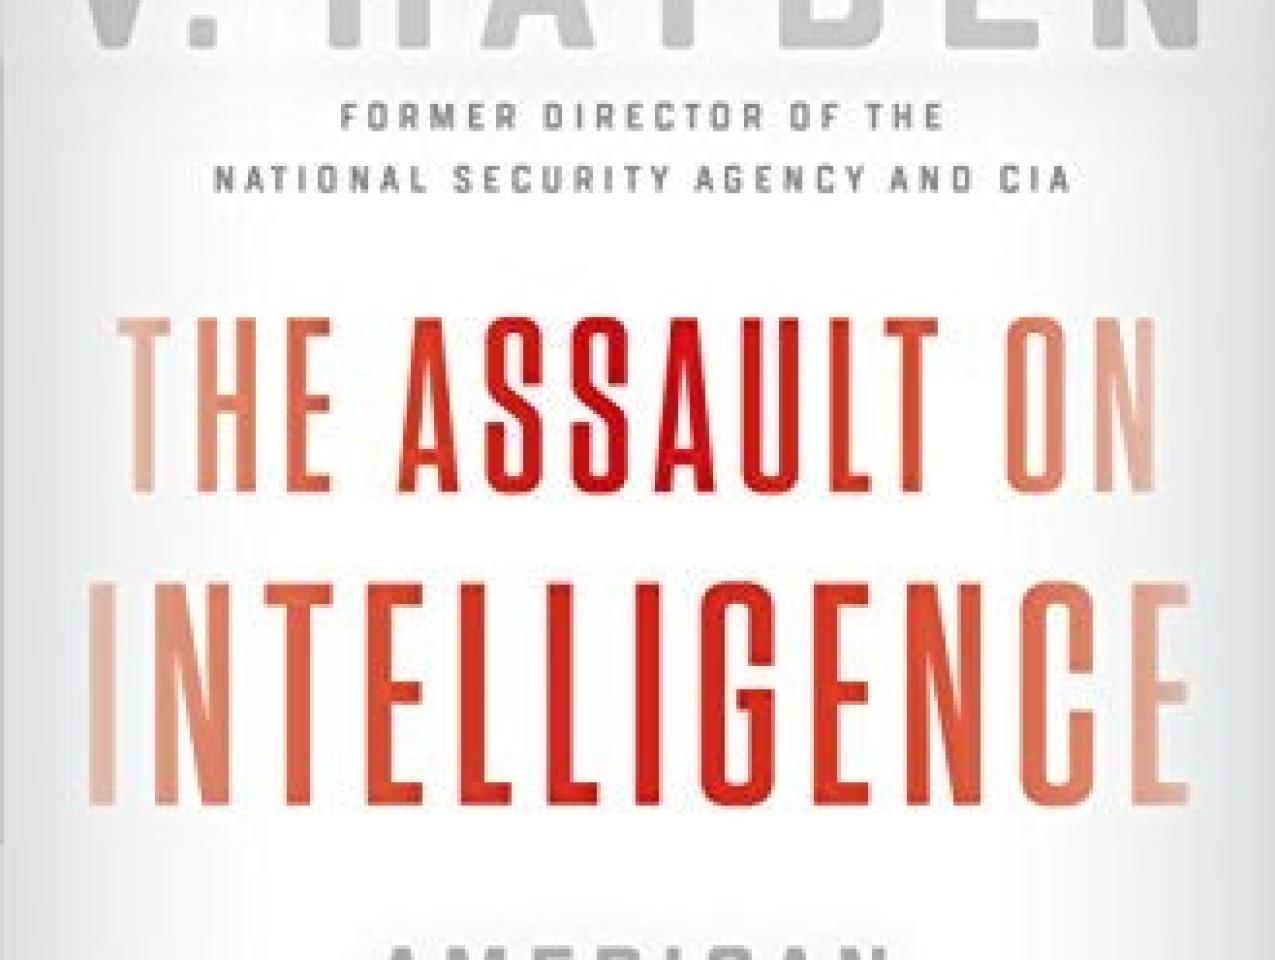 Image for The Assault On Intelligence: American National Security In An Age Of Lies